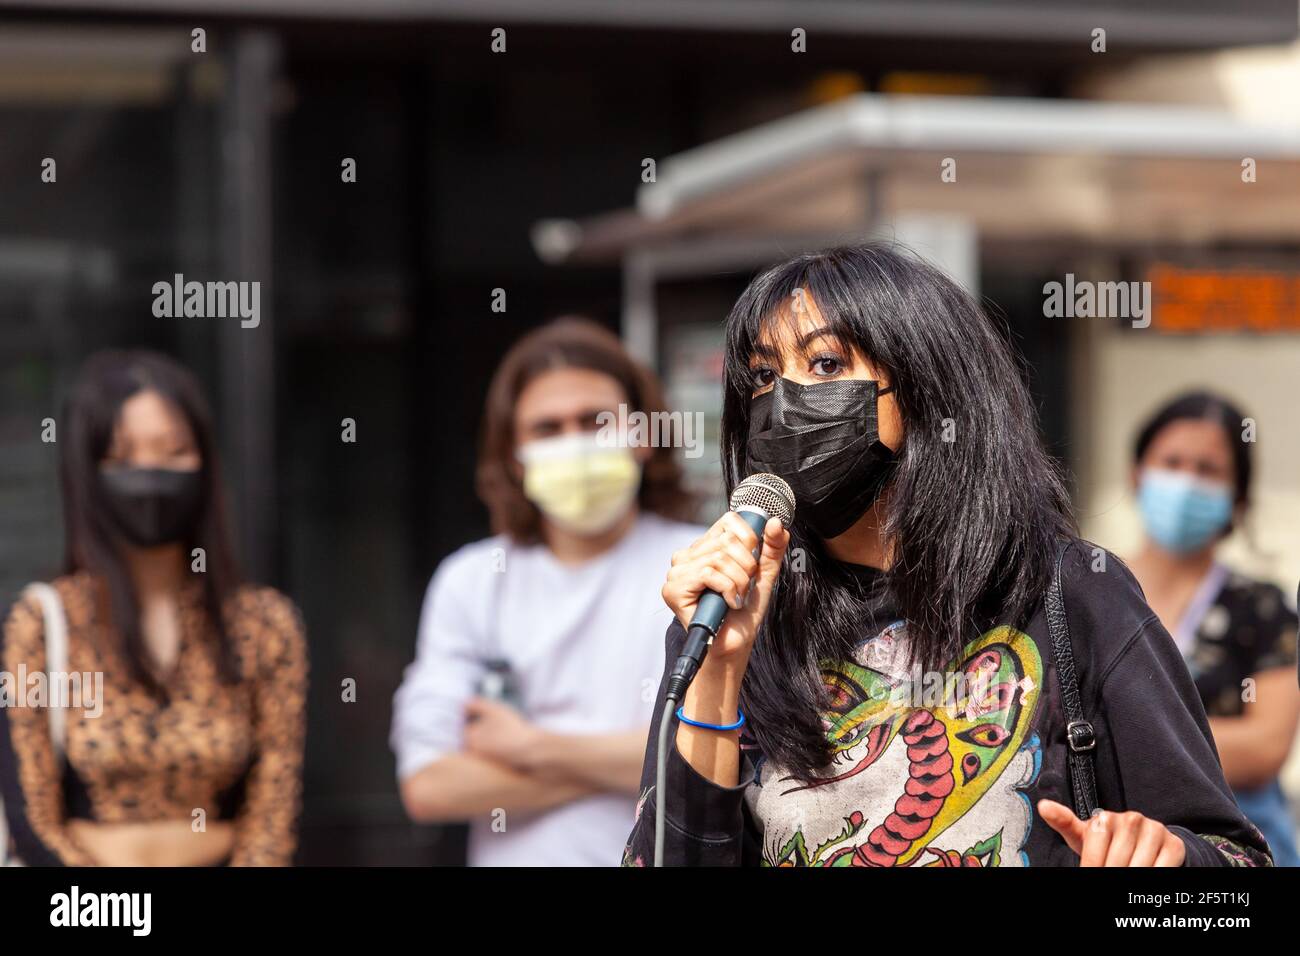 Washington, DC, USA, 27 March, 2021.  Pictured: Hadra, an activist with Students Against Imperialism at George Washington University, speaks to roughly 100 people gathered to protest anti-Asian violence.  Credit: Allison C Bailey/Alamy Live News Stock Photo